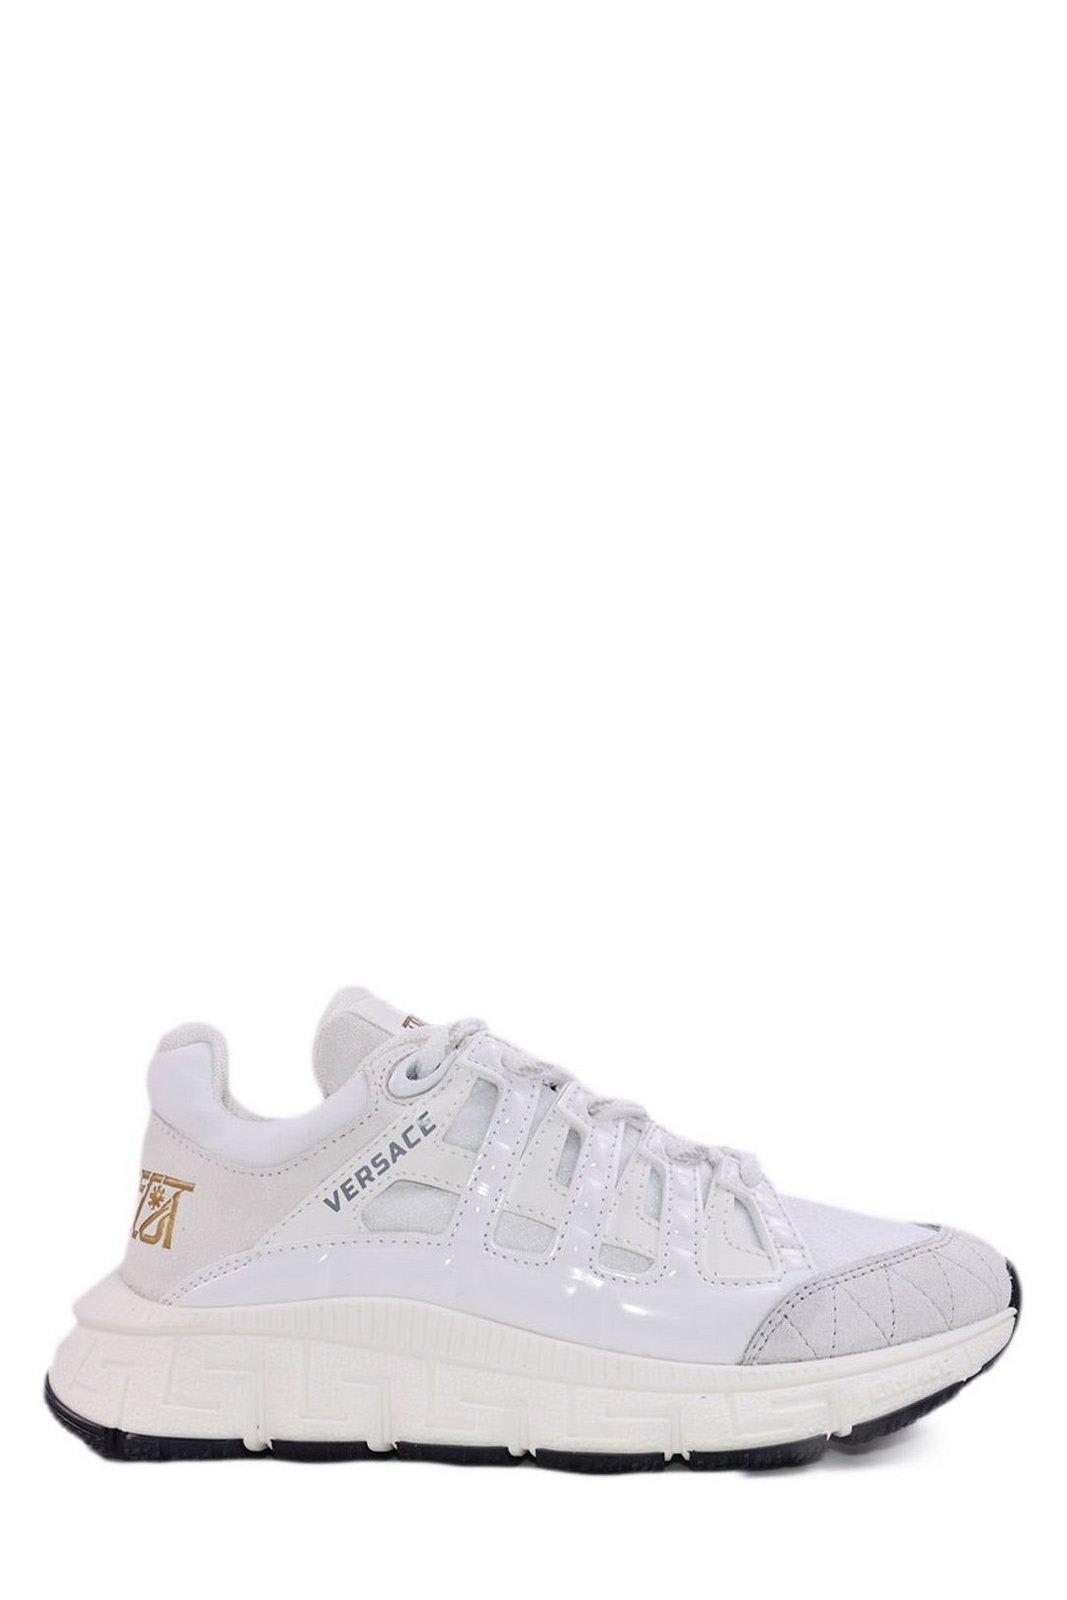 VERSACE LOGO PATCH LACE-UP SNEAKERS